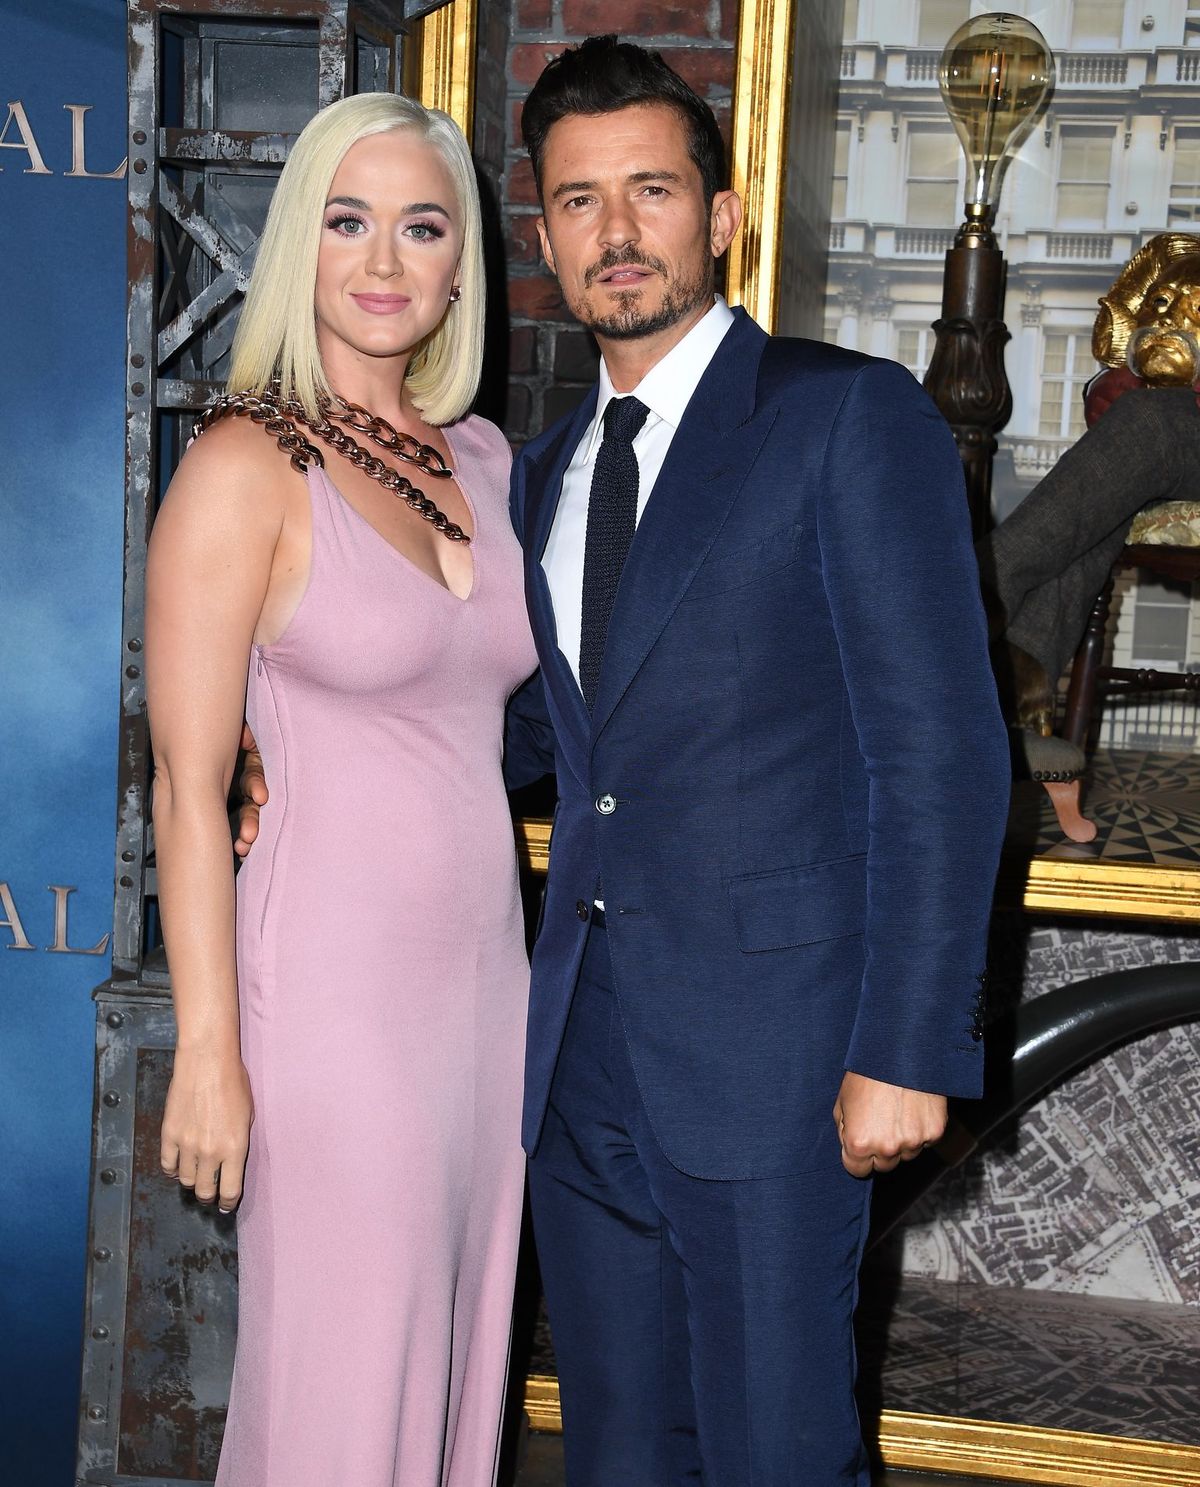 Katy Perry and Orlando Bloom at the Los Angeles premiere of "Carnival Row" on August 21, 2019, in Hollywood, California | Photo: Getty Images